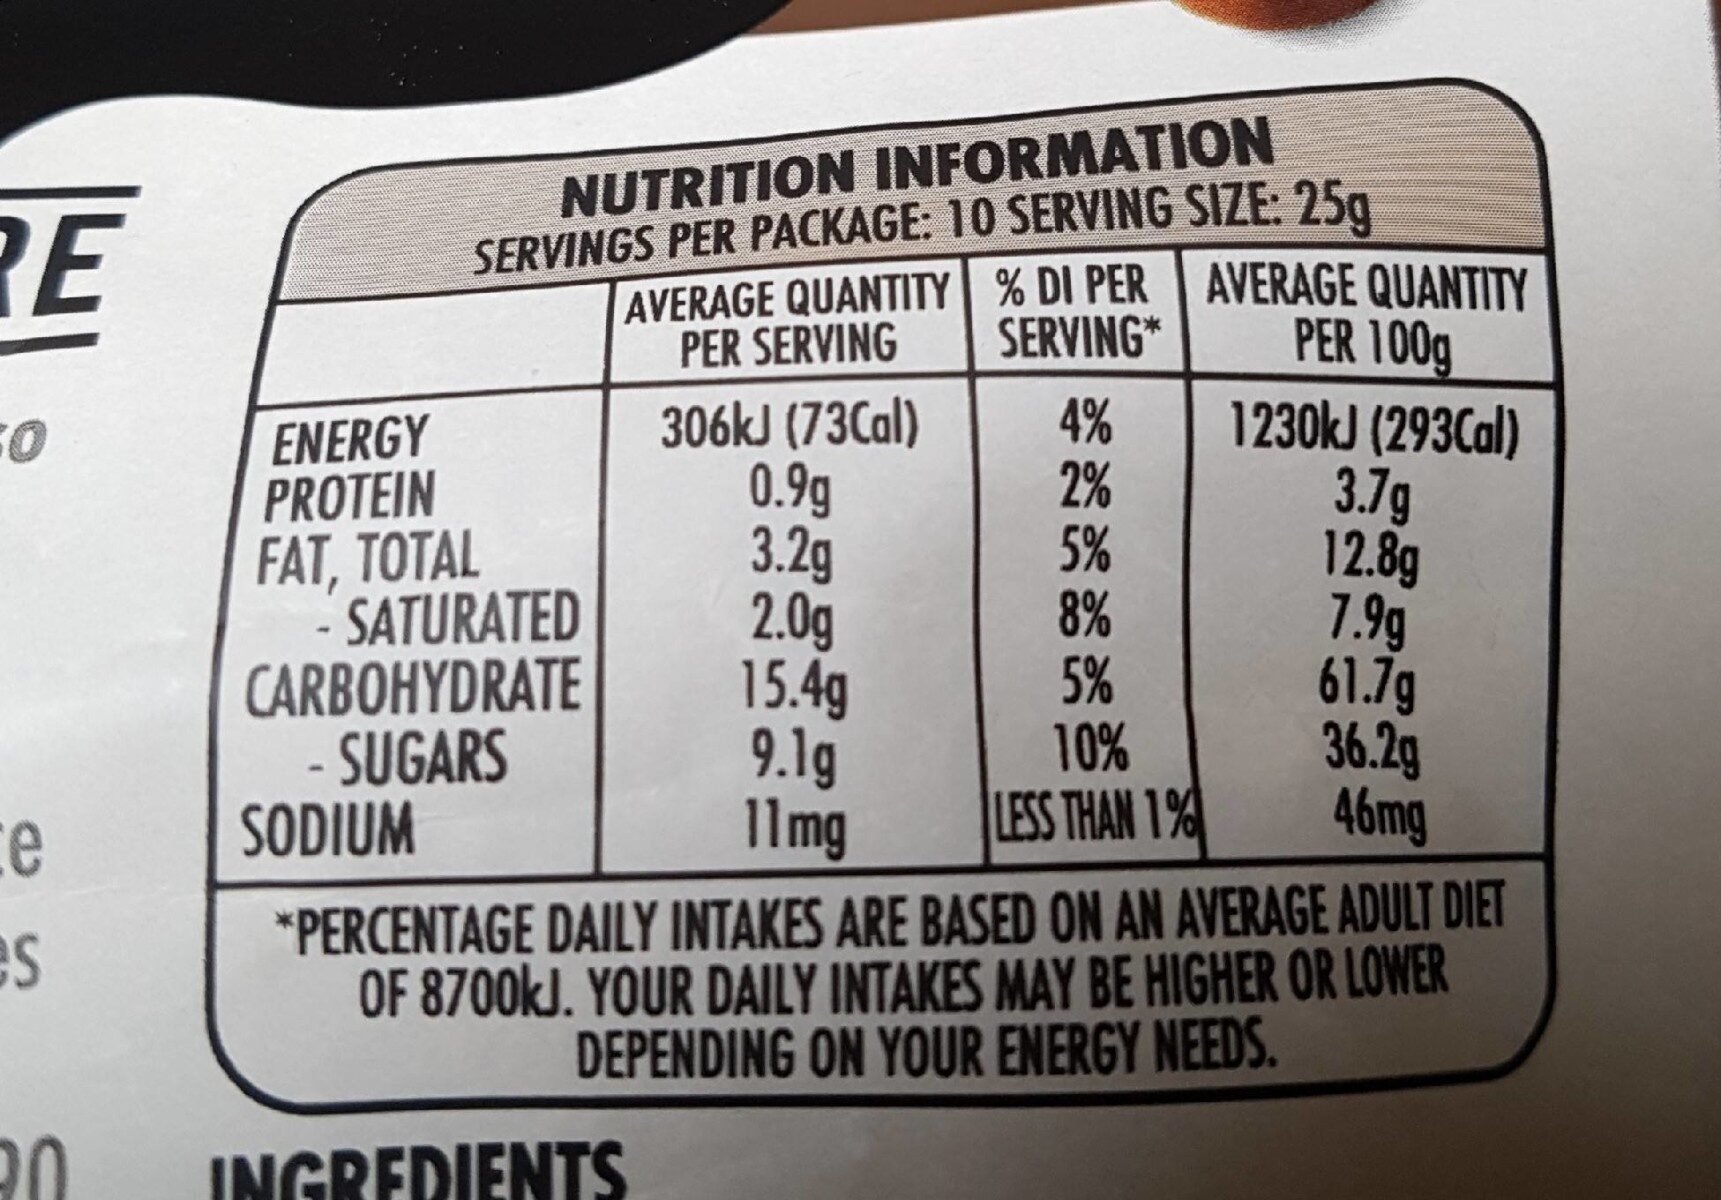 Bullets - Nutrition facts